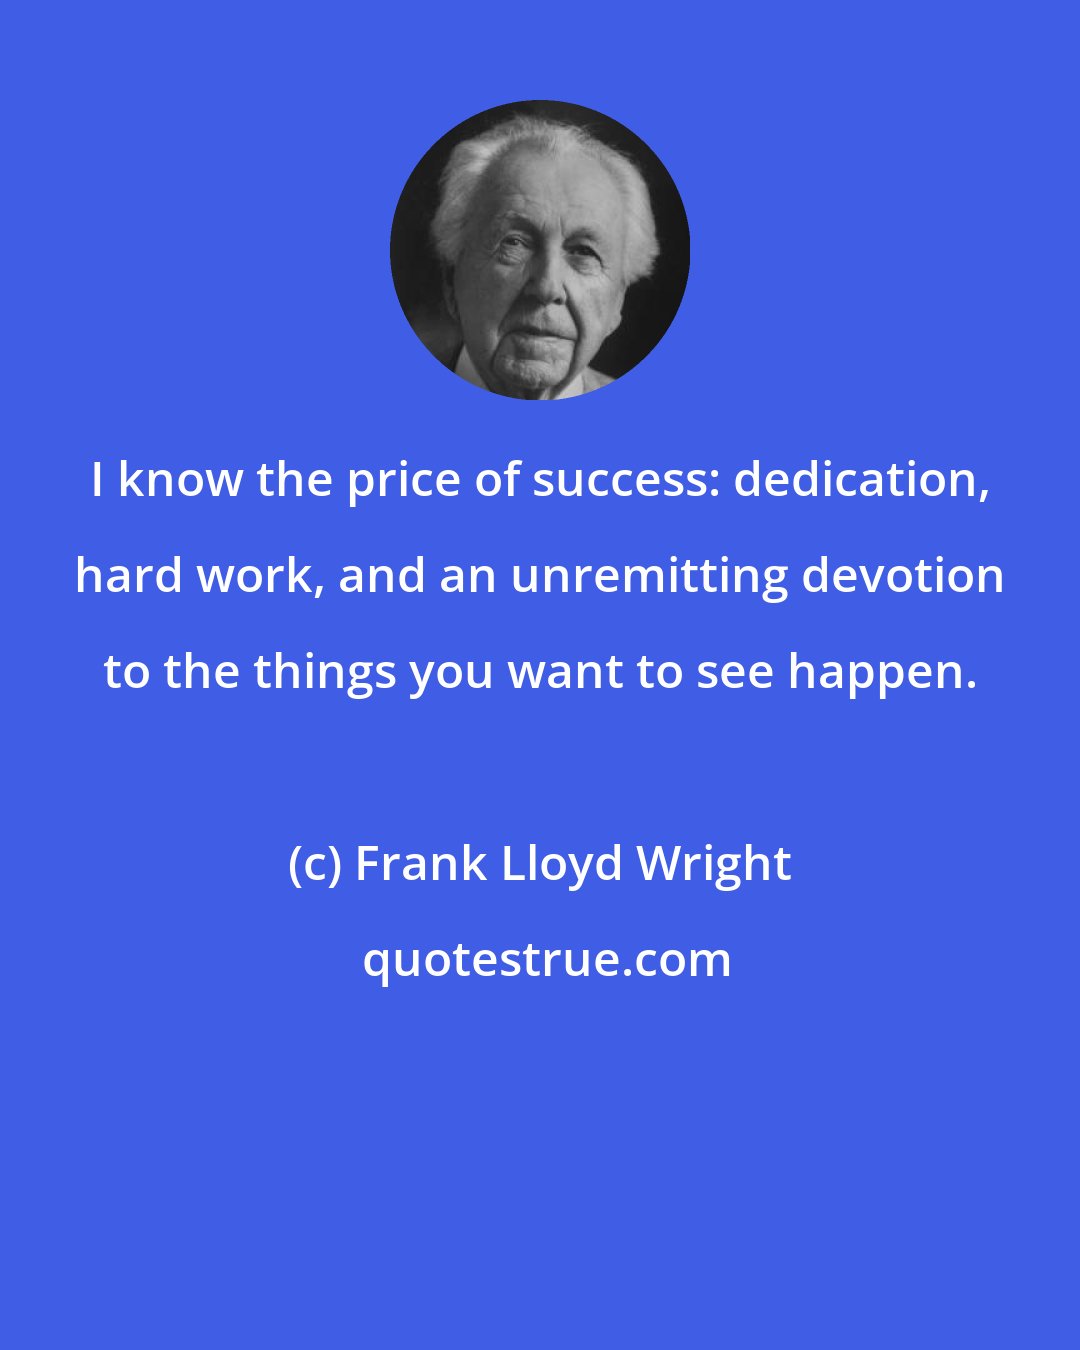 Frank Lloyd Wright: I know the price of success: dedication, hard work, and an unremitting devotion to the things you want to see happen.